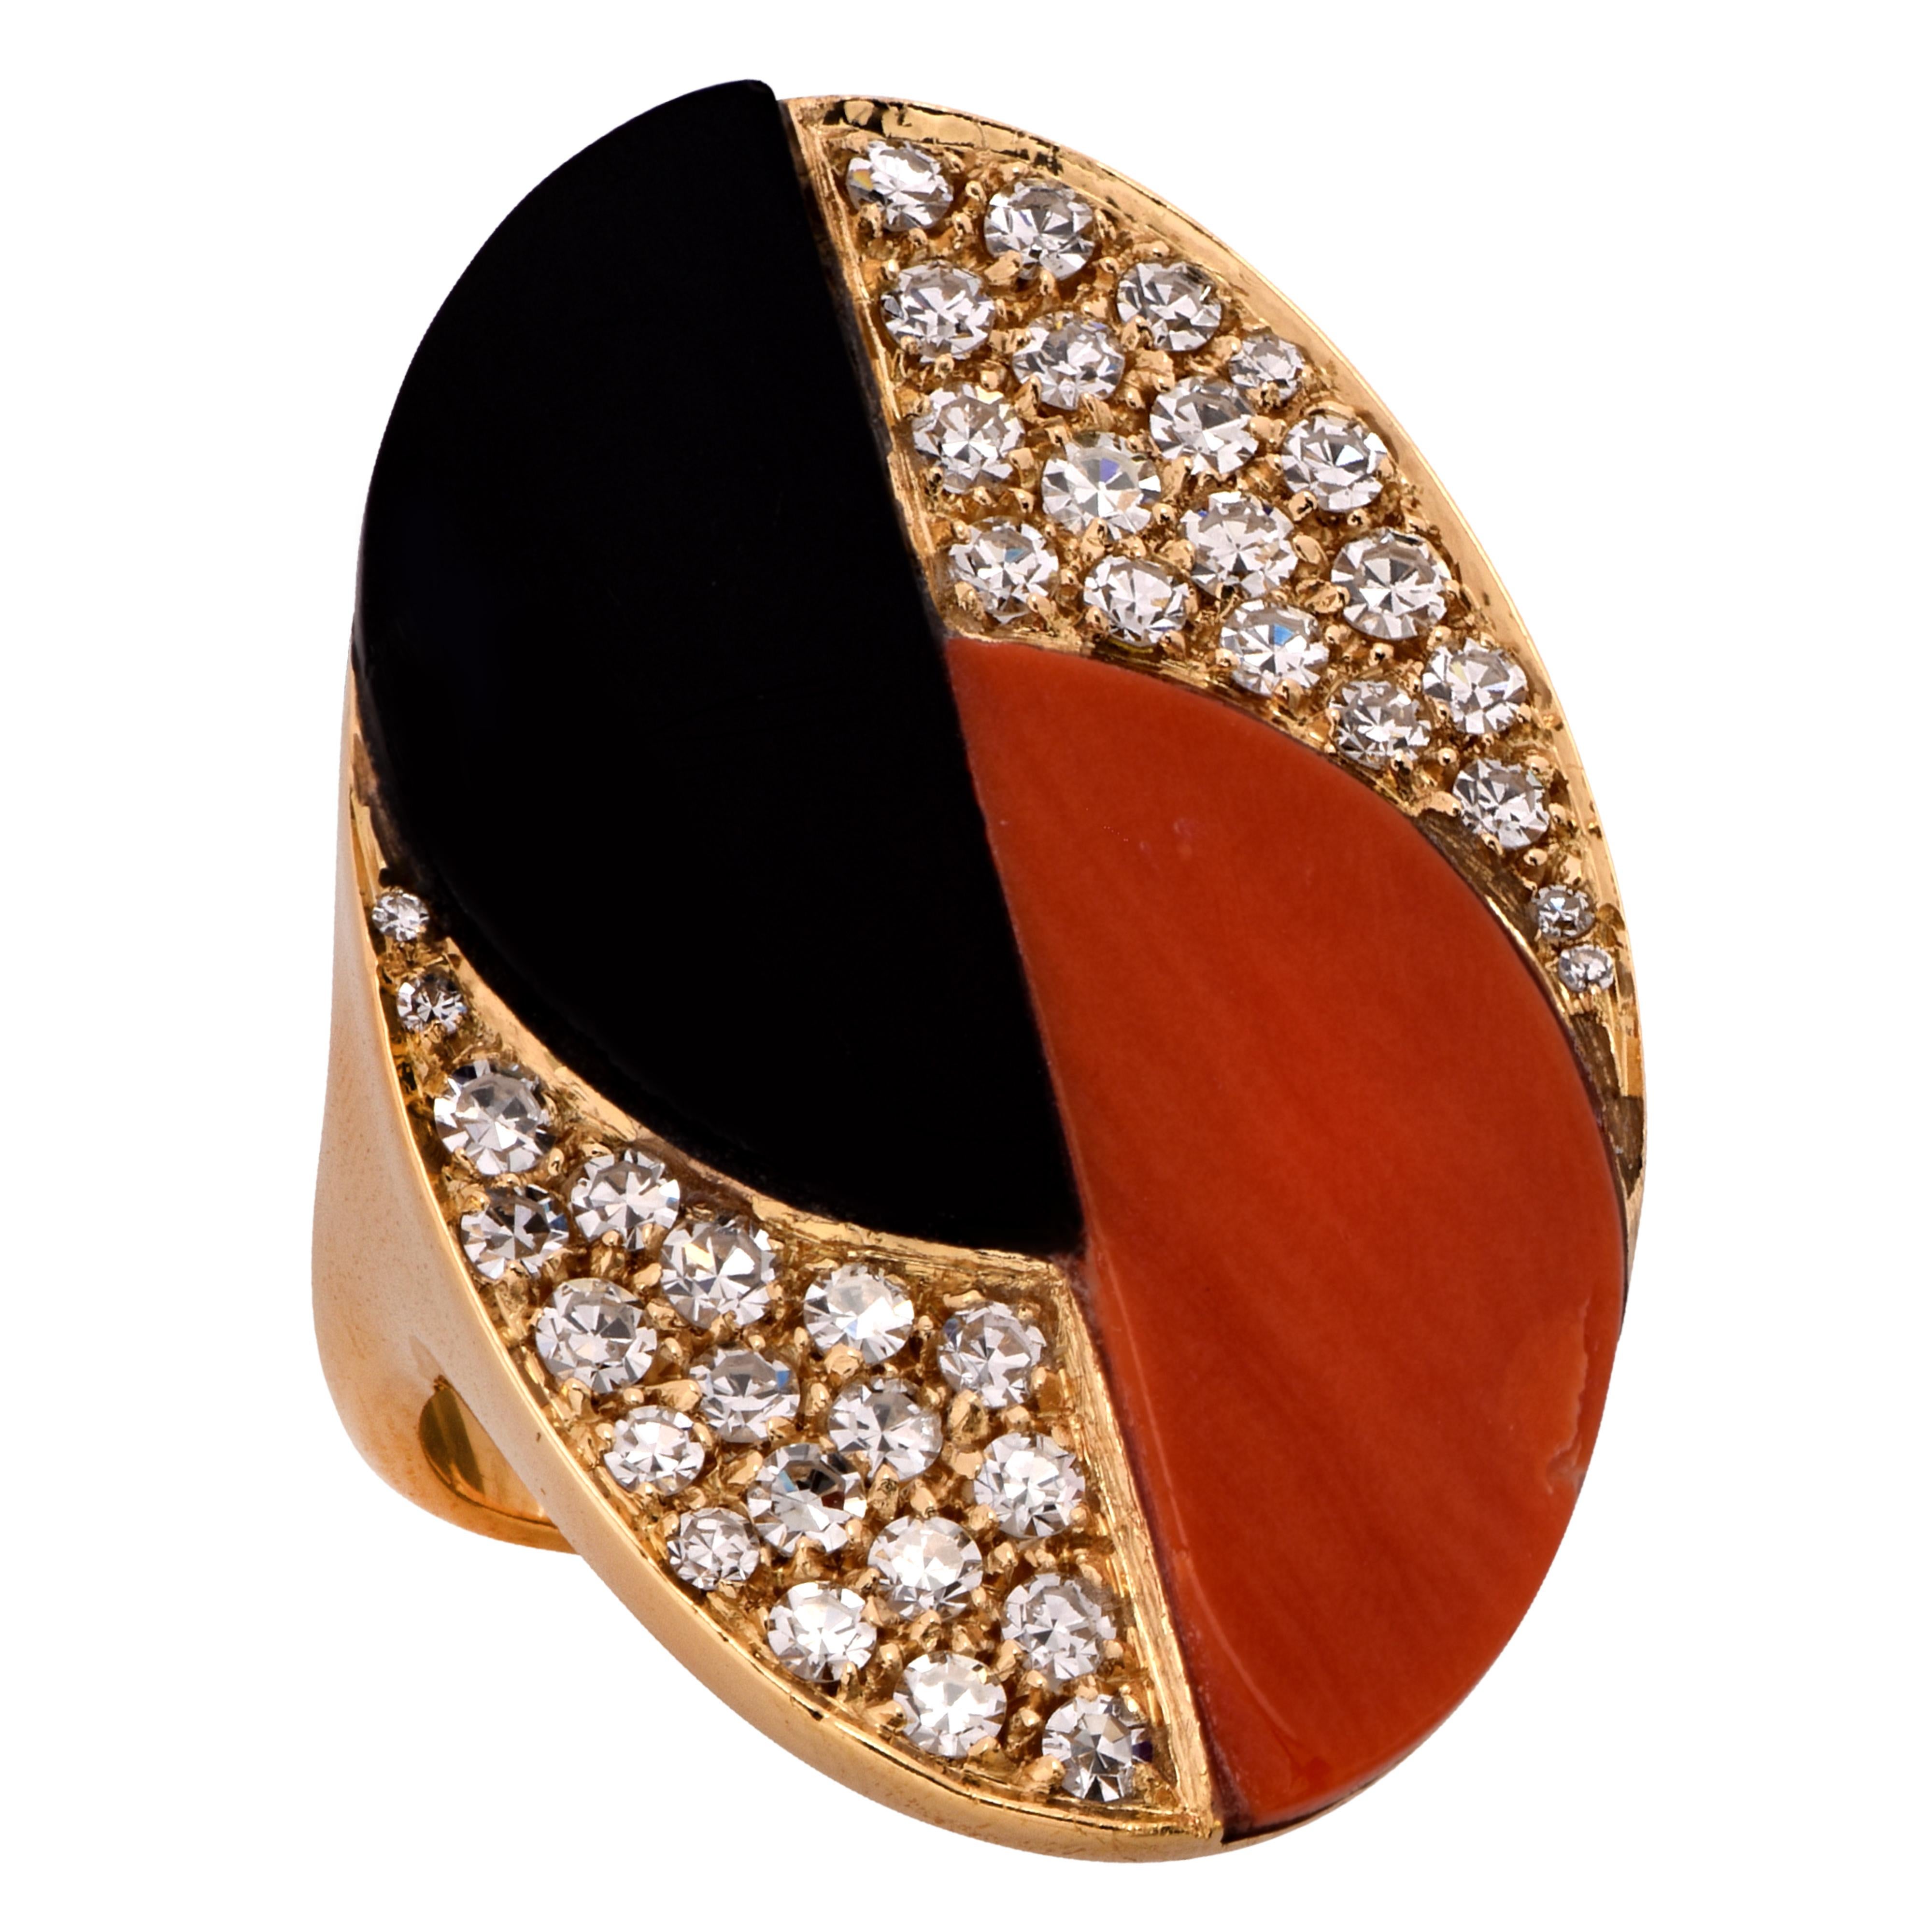 Modernist Coral, Diamond and Onyx Ring